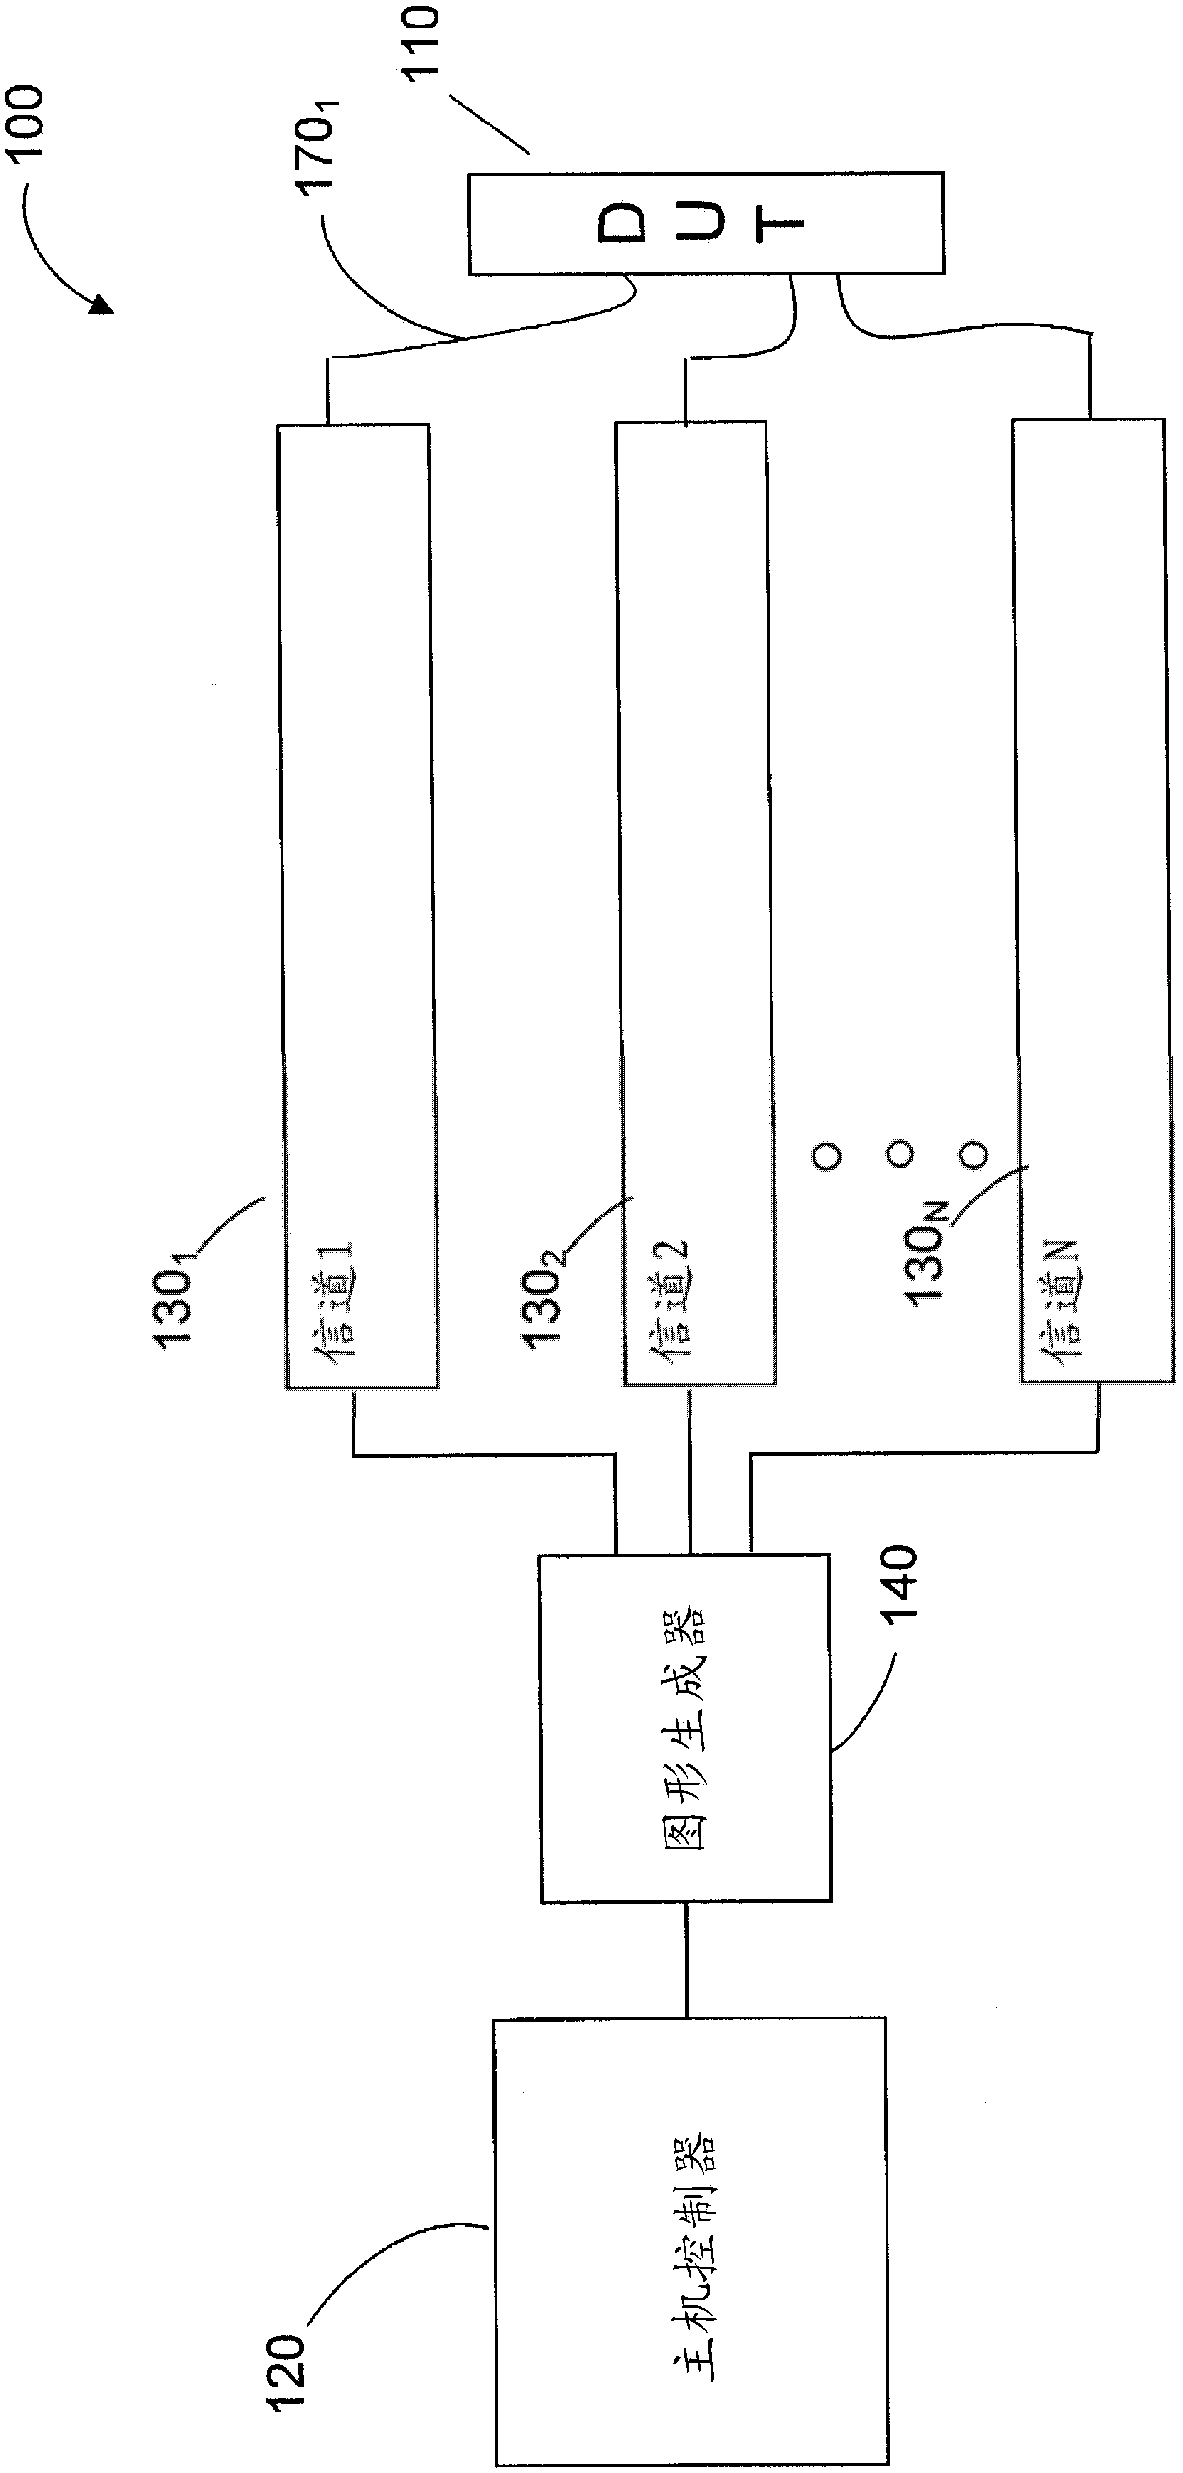 Automatic test system with event detection capability